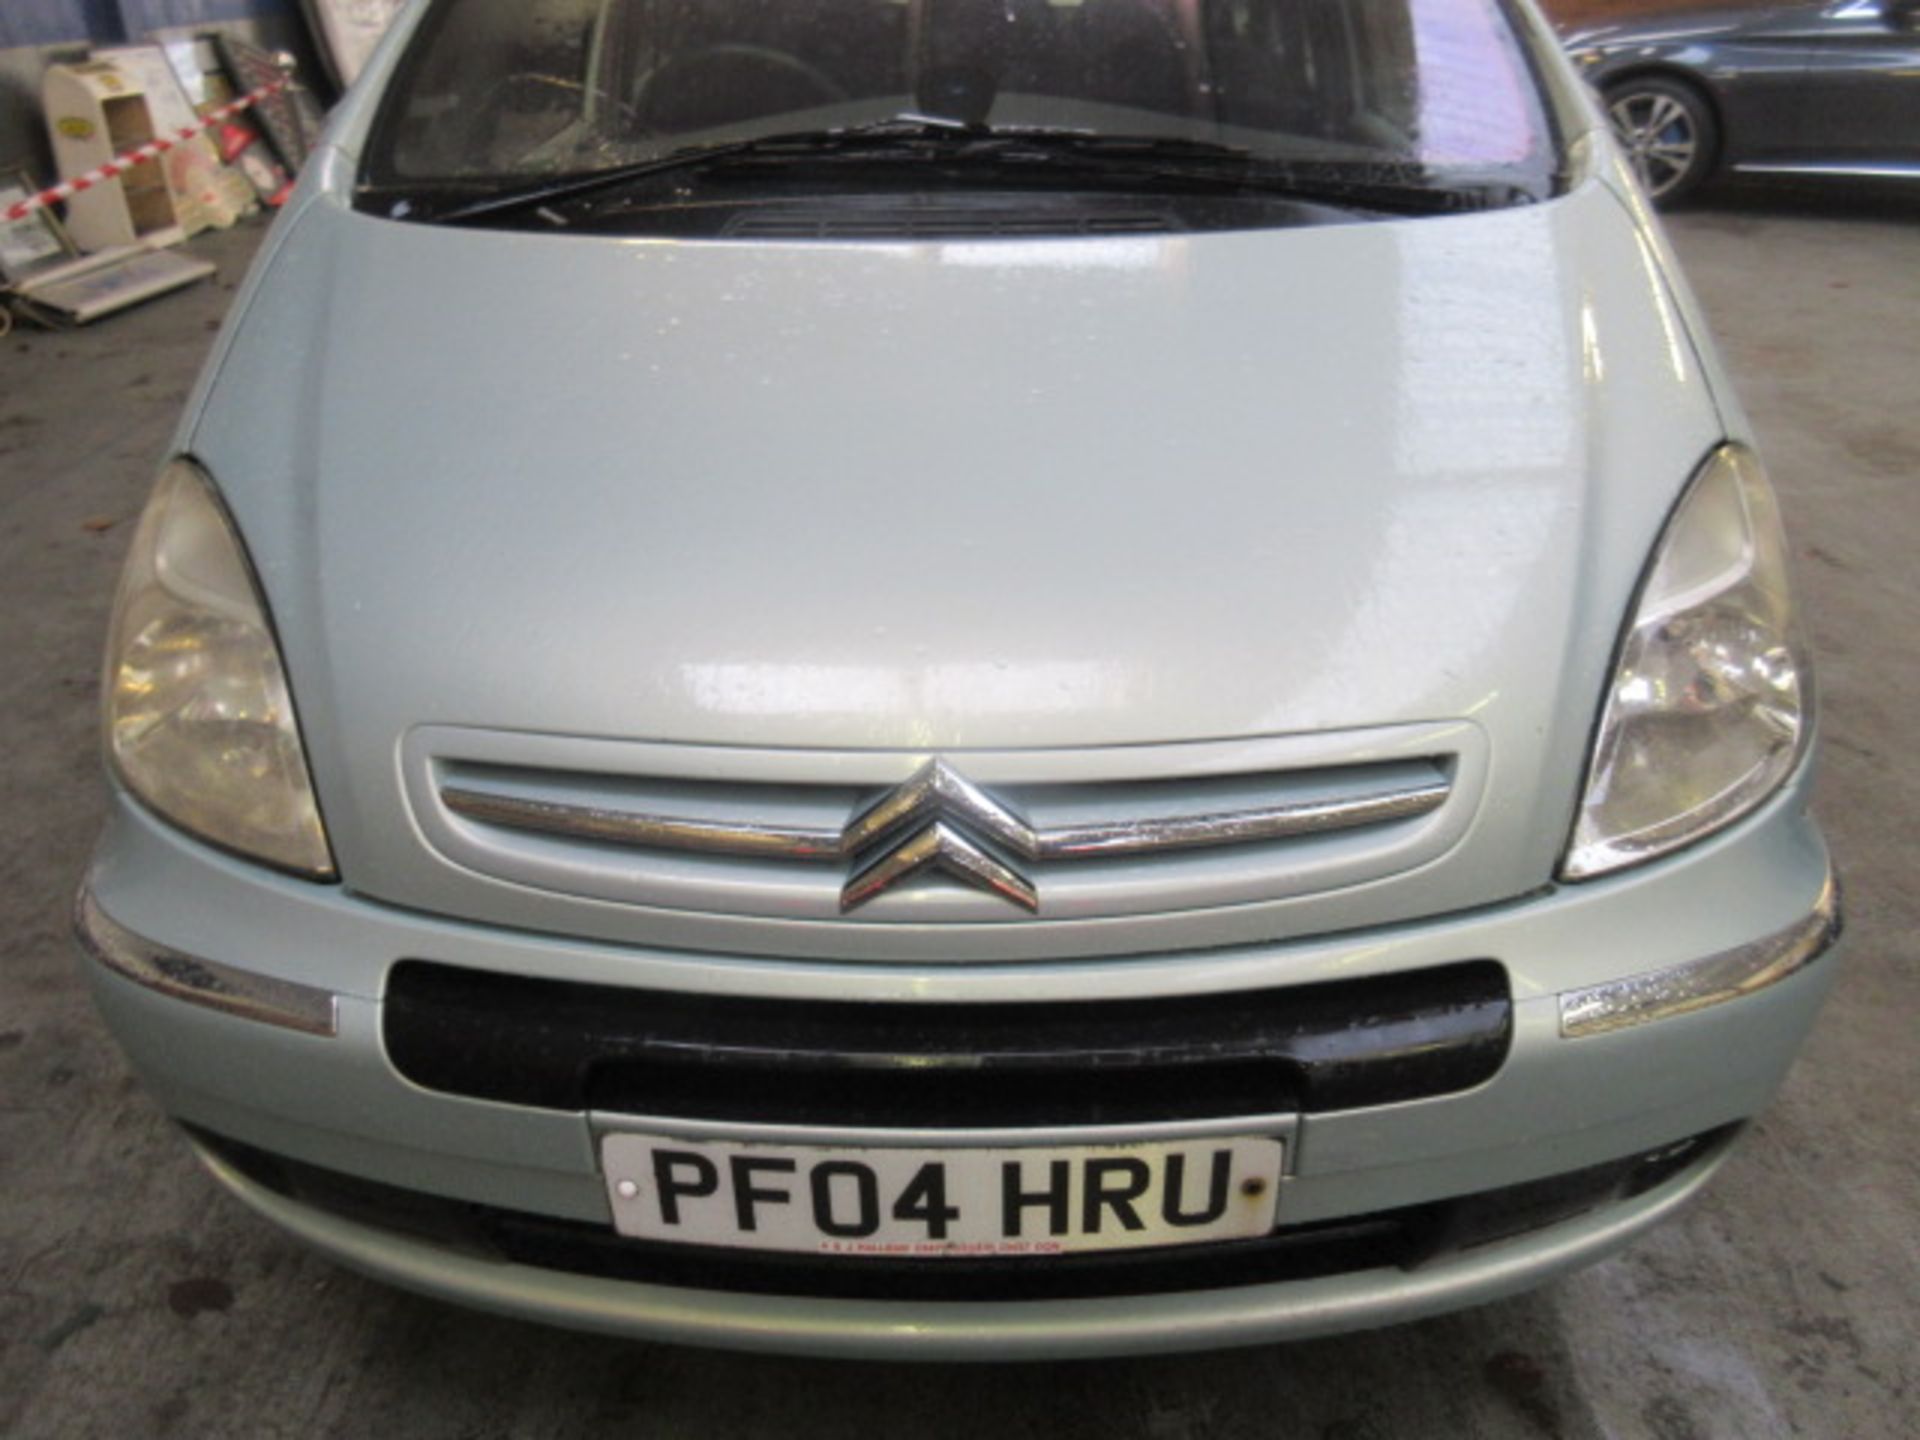 04 04 Citroen Xsara Picasso HDI Excl - Image 5 of 14